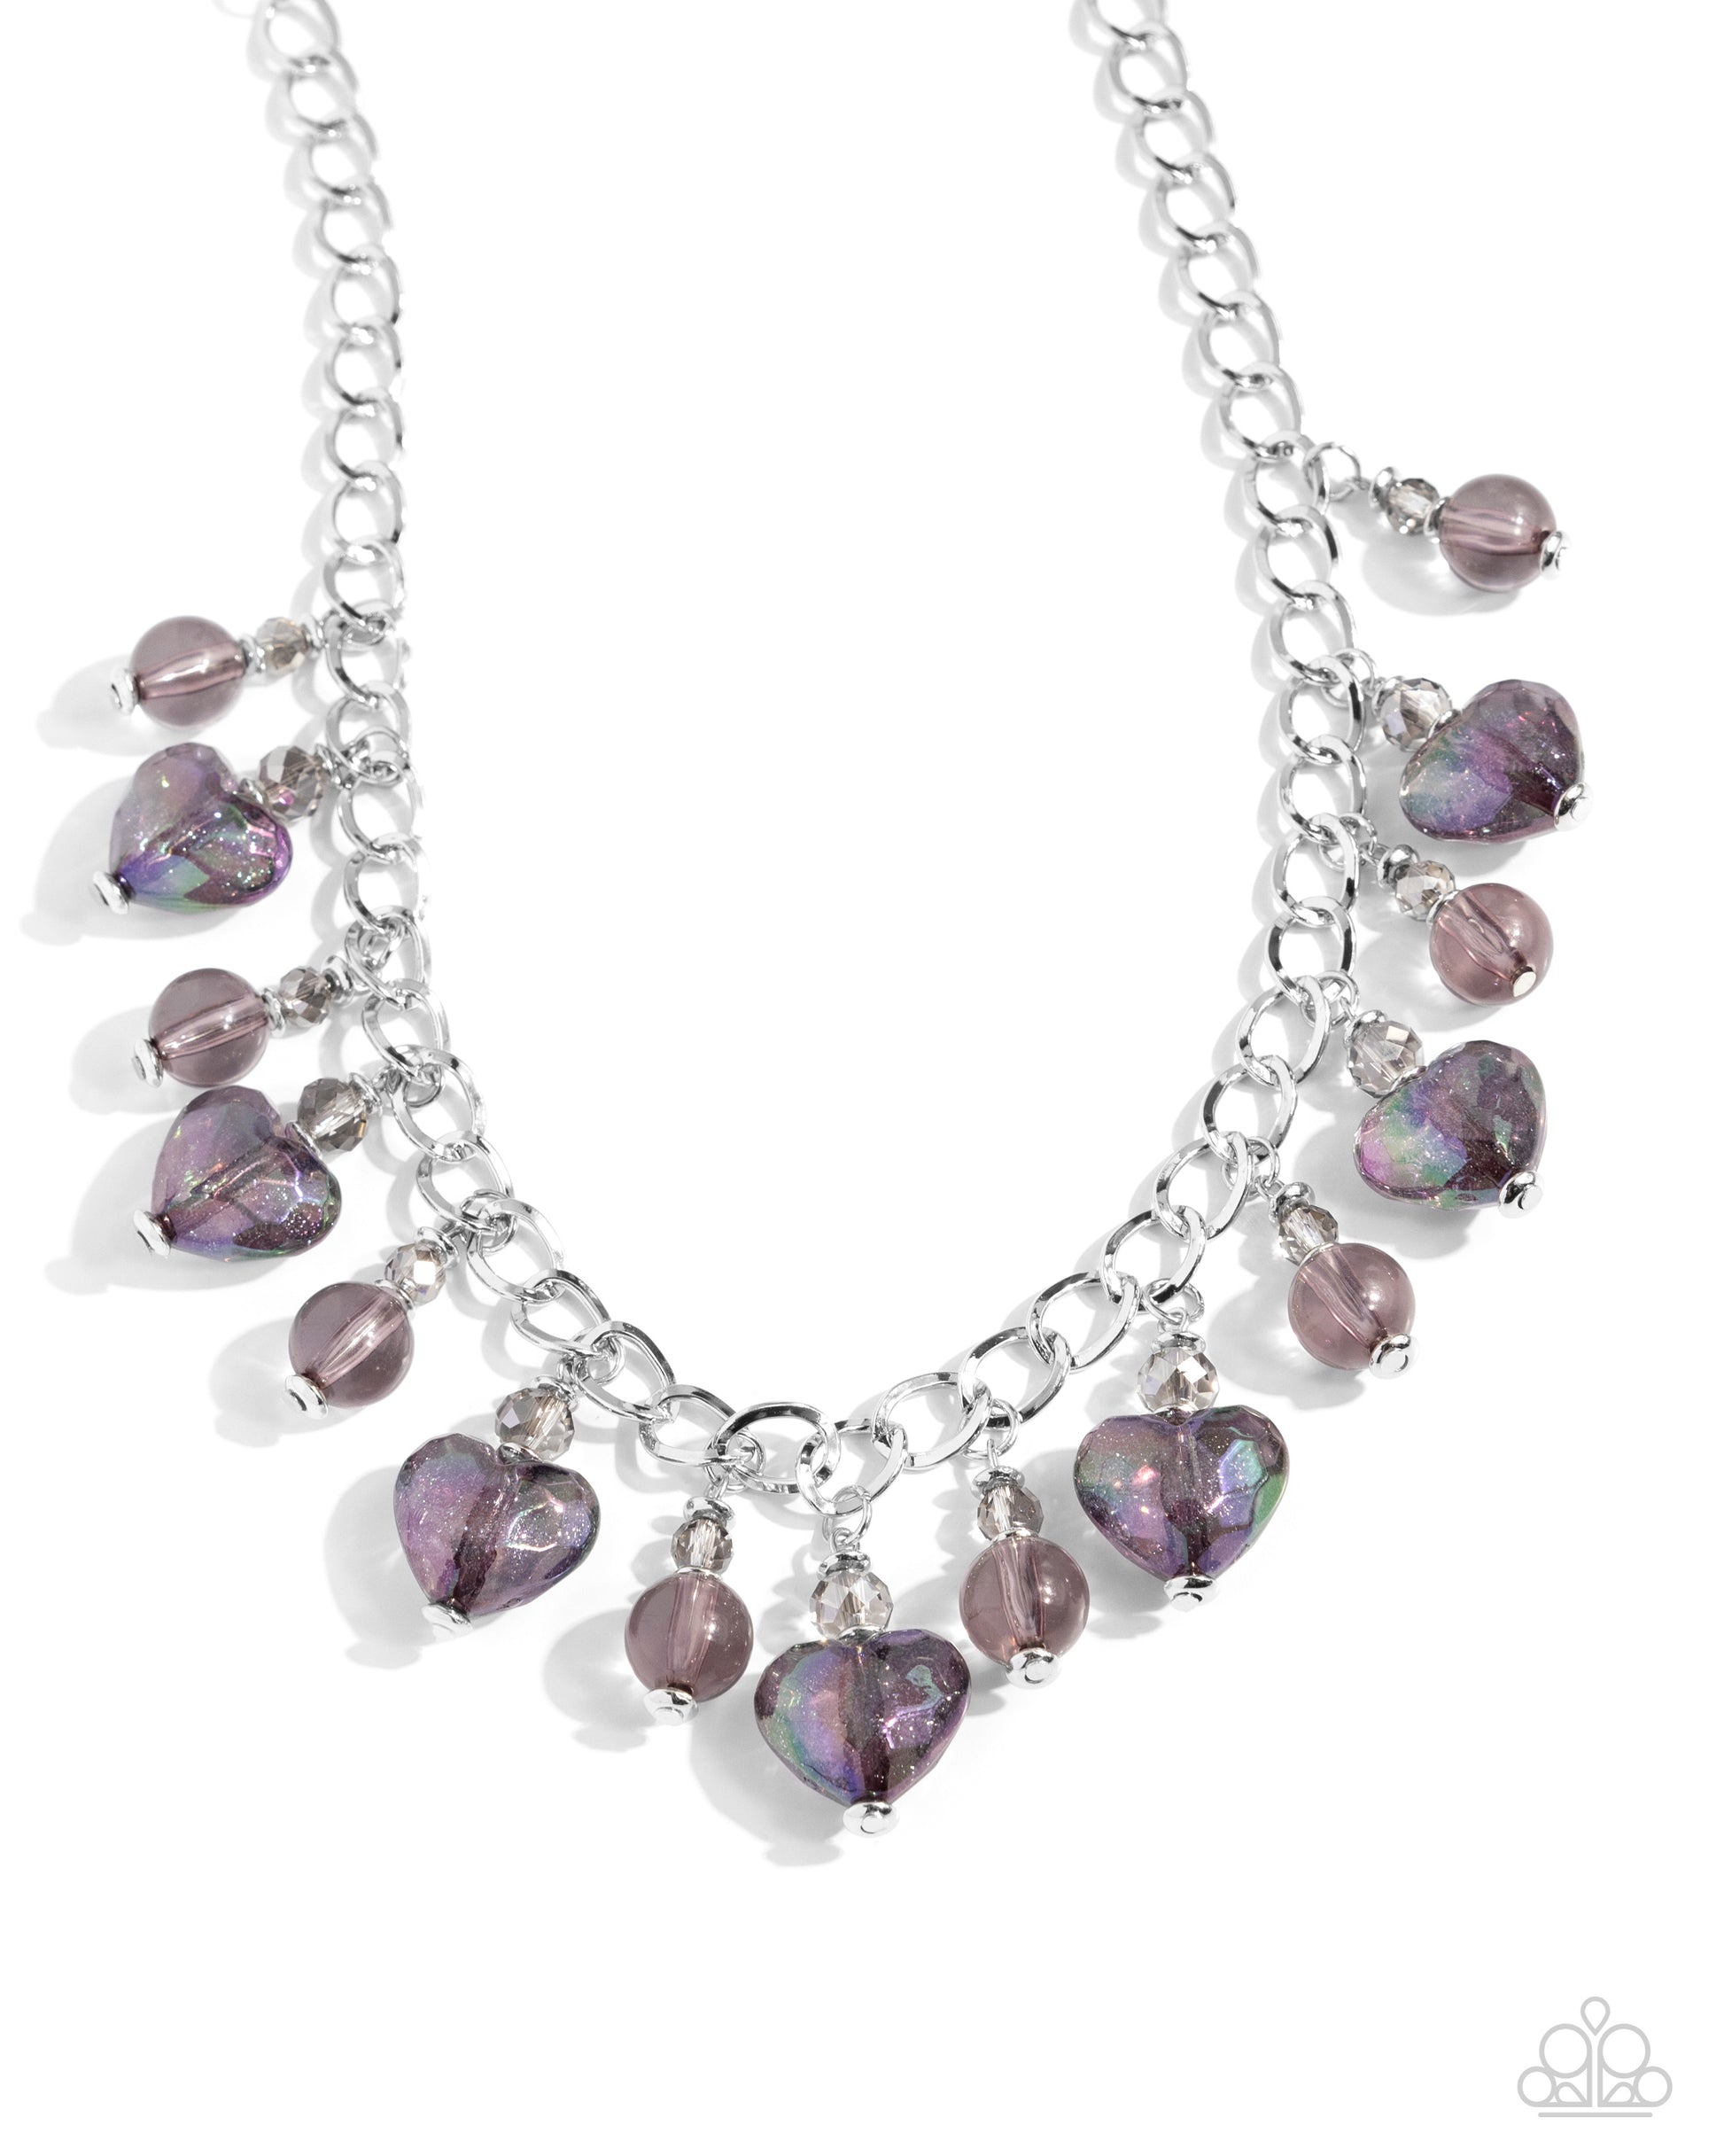 <p>A faceted smoky crystal-like bead gives way to sparkling black iridescent heart beads that alternate with round black beads from a thin silver curb chain for a calming, courting display. Features an adjustable clasp closure. Due to its prismatic palette, color may vary.</p> <p><i> Sold as one individual necklace. Includes one pair of matching earrings.</i></p>